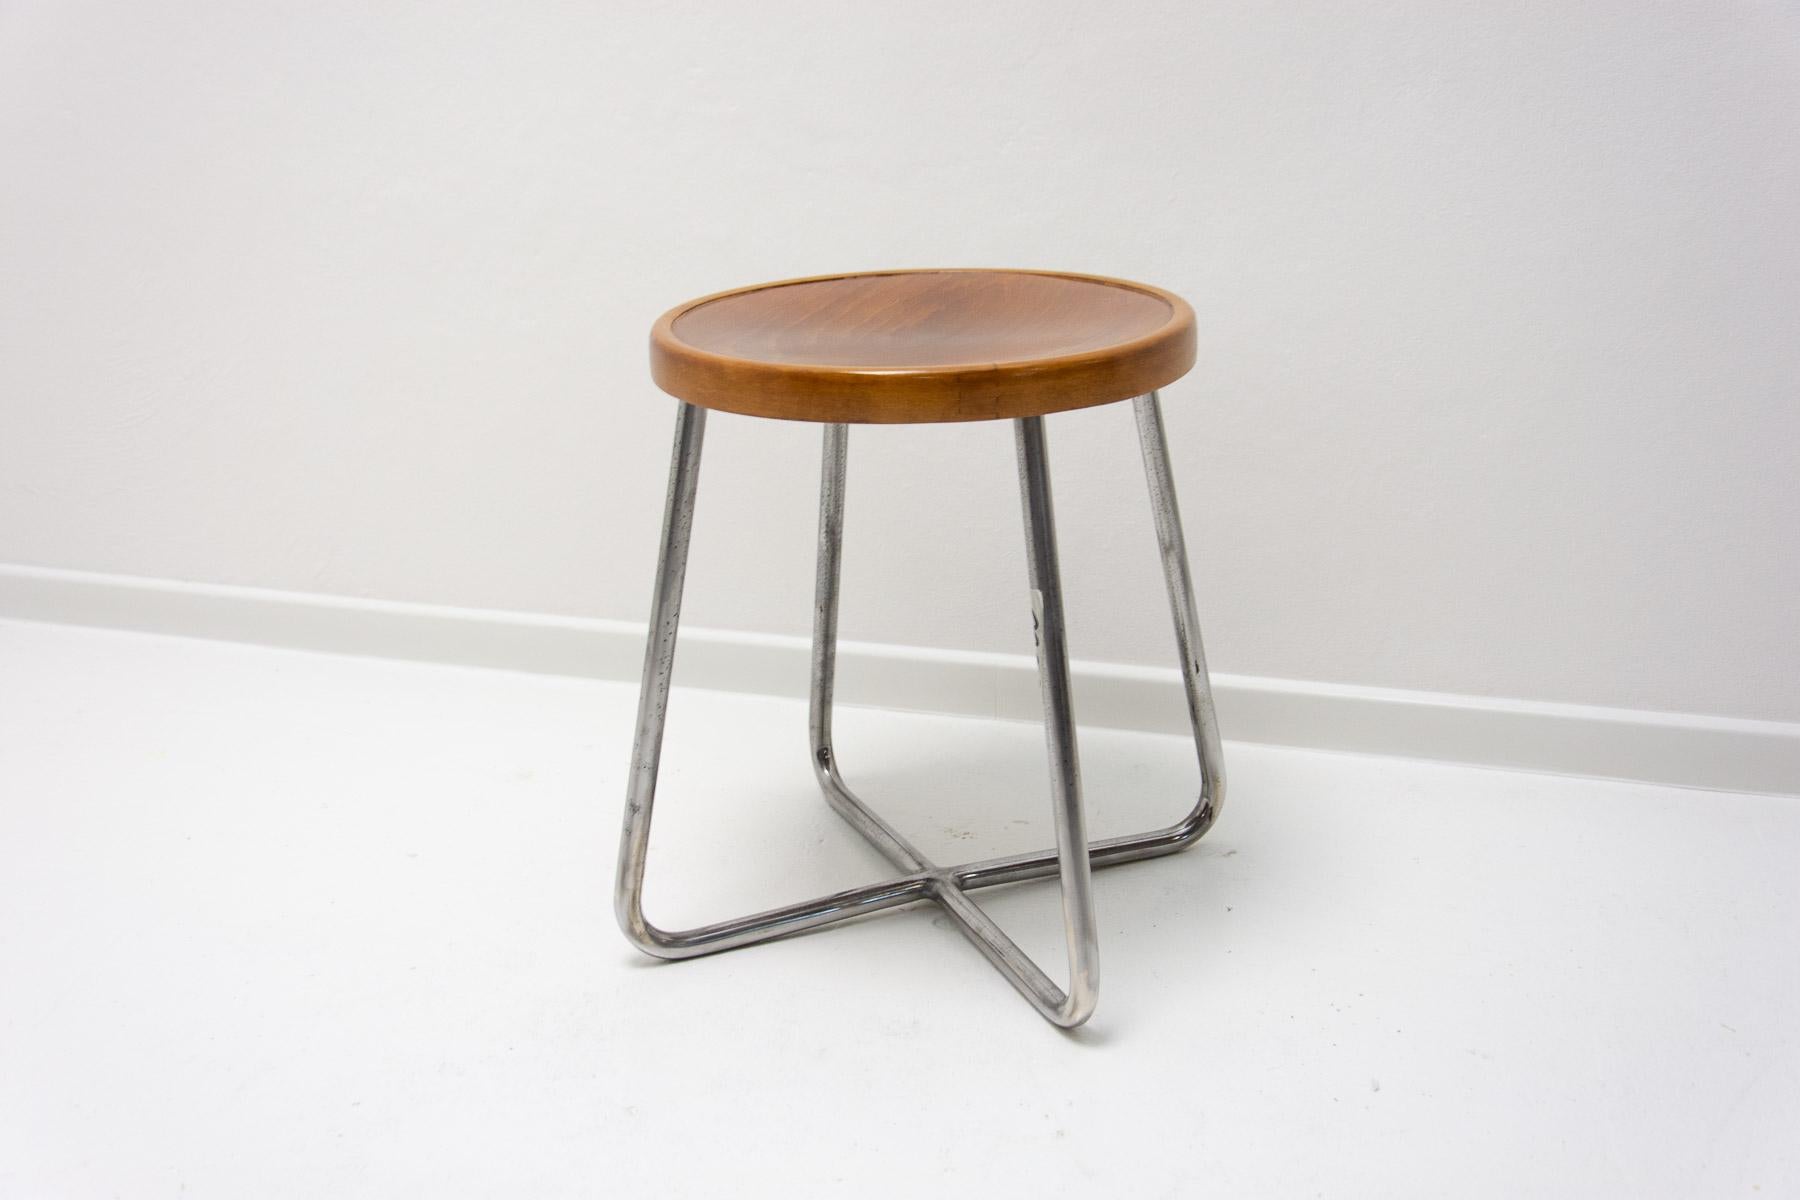 This chrome-plated stool, catalog number Hn 6, was designed by the world-famous designer MARCEL BREUER (1902–1981) in the 1930s. It was manufactured in the former Czechoslovakia by the company Mücke-Melder, Fryštát, which focused on the production